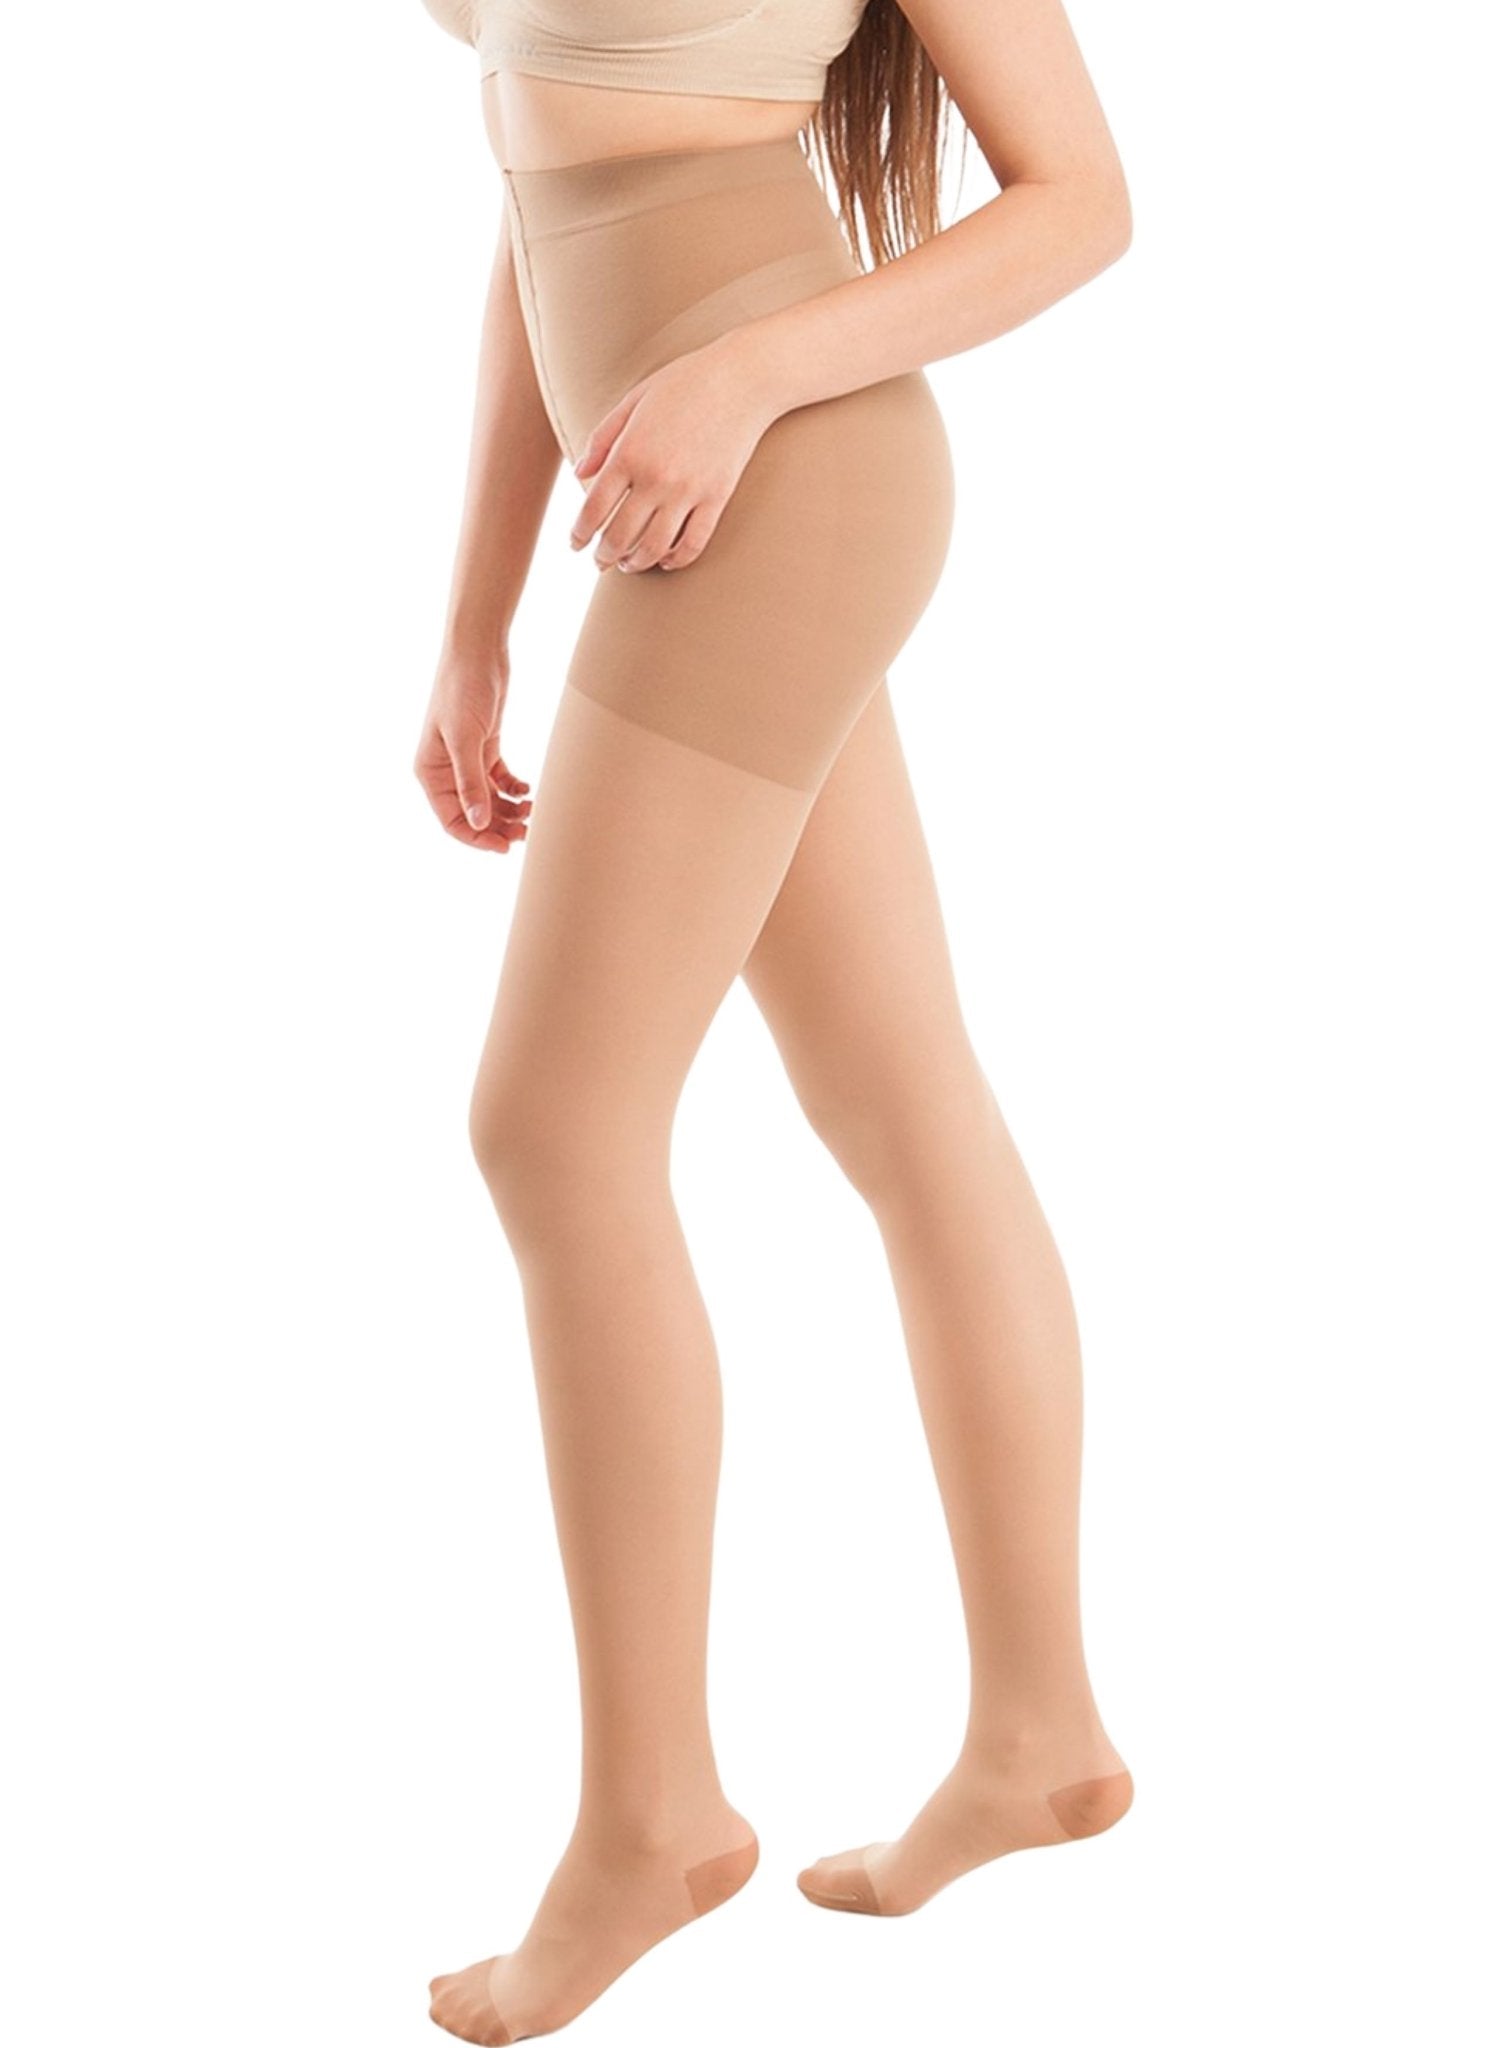 Sheer Pantyhose Graduated Medium Compression - Beige – Mums and Bumps